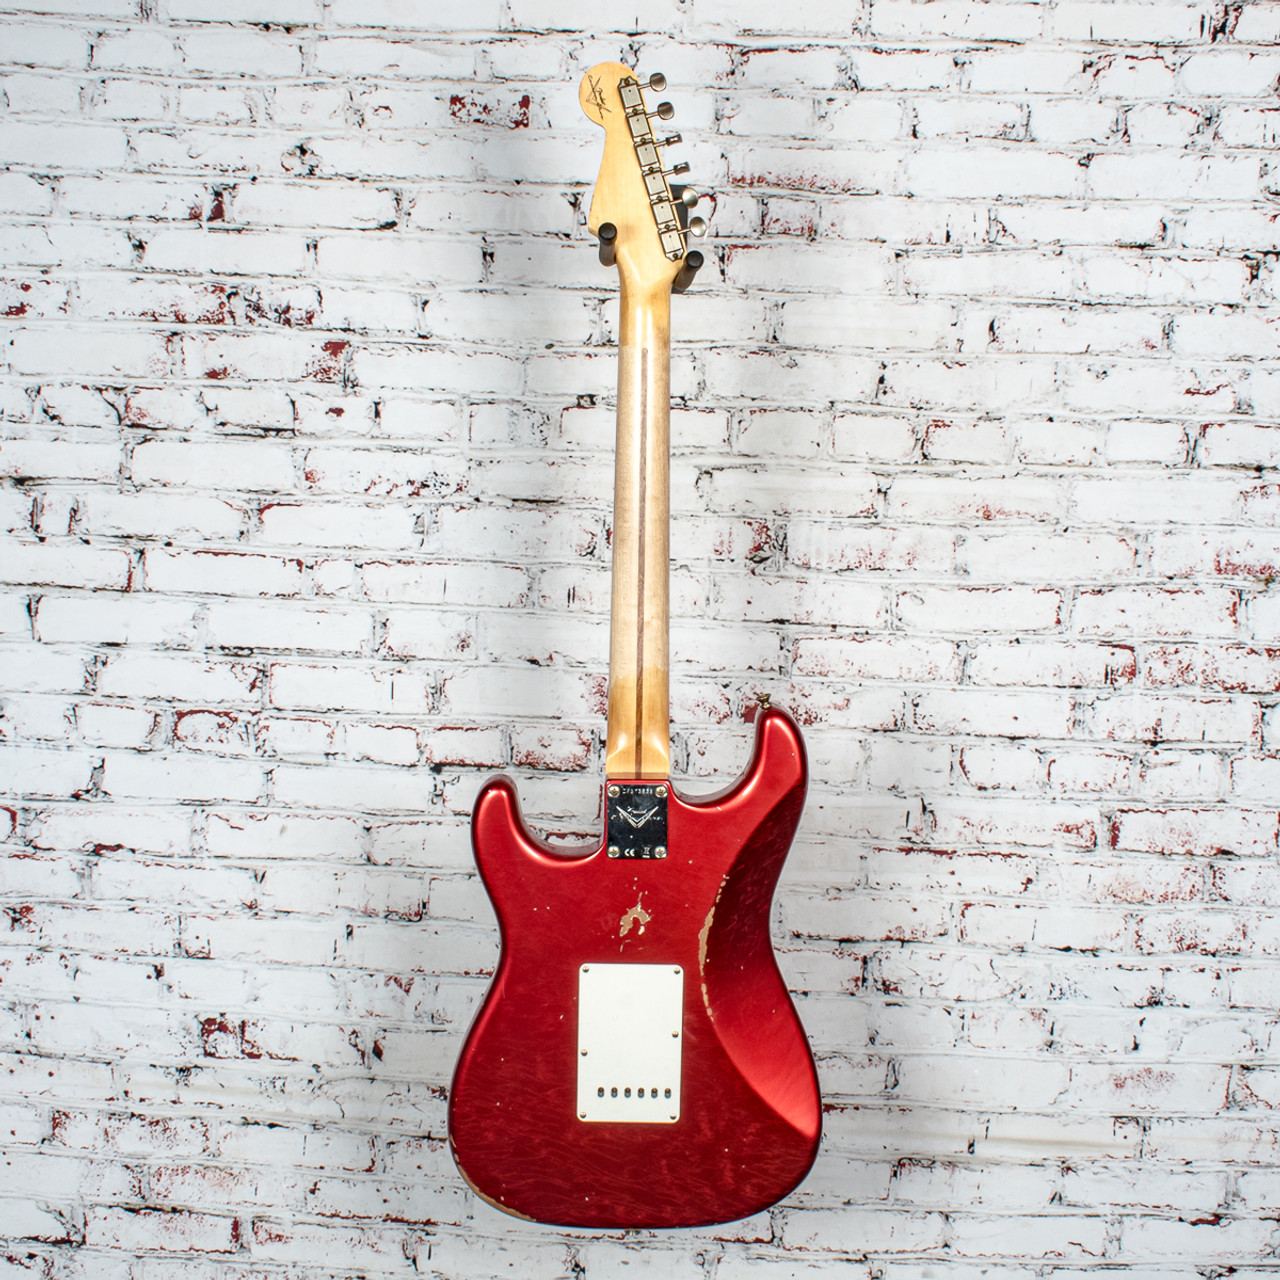 Fender - B2 Custom Shop '58 Relic - Stratocaster® Electric Guitar - Maple  Neck - Faded Aged Candy Apple Red - w/ Custom Hardshell Case - x3838